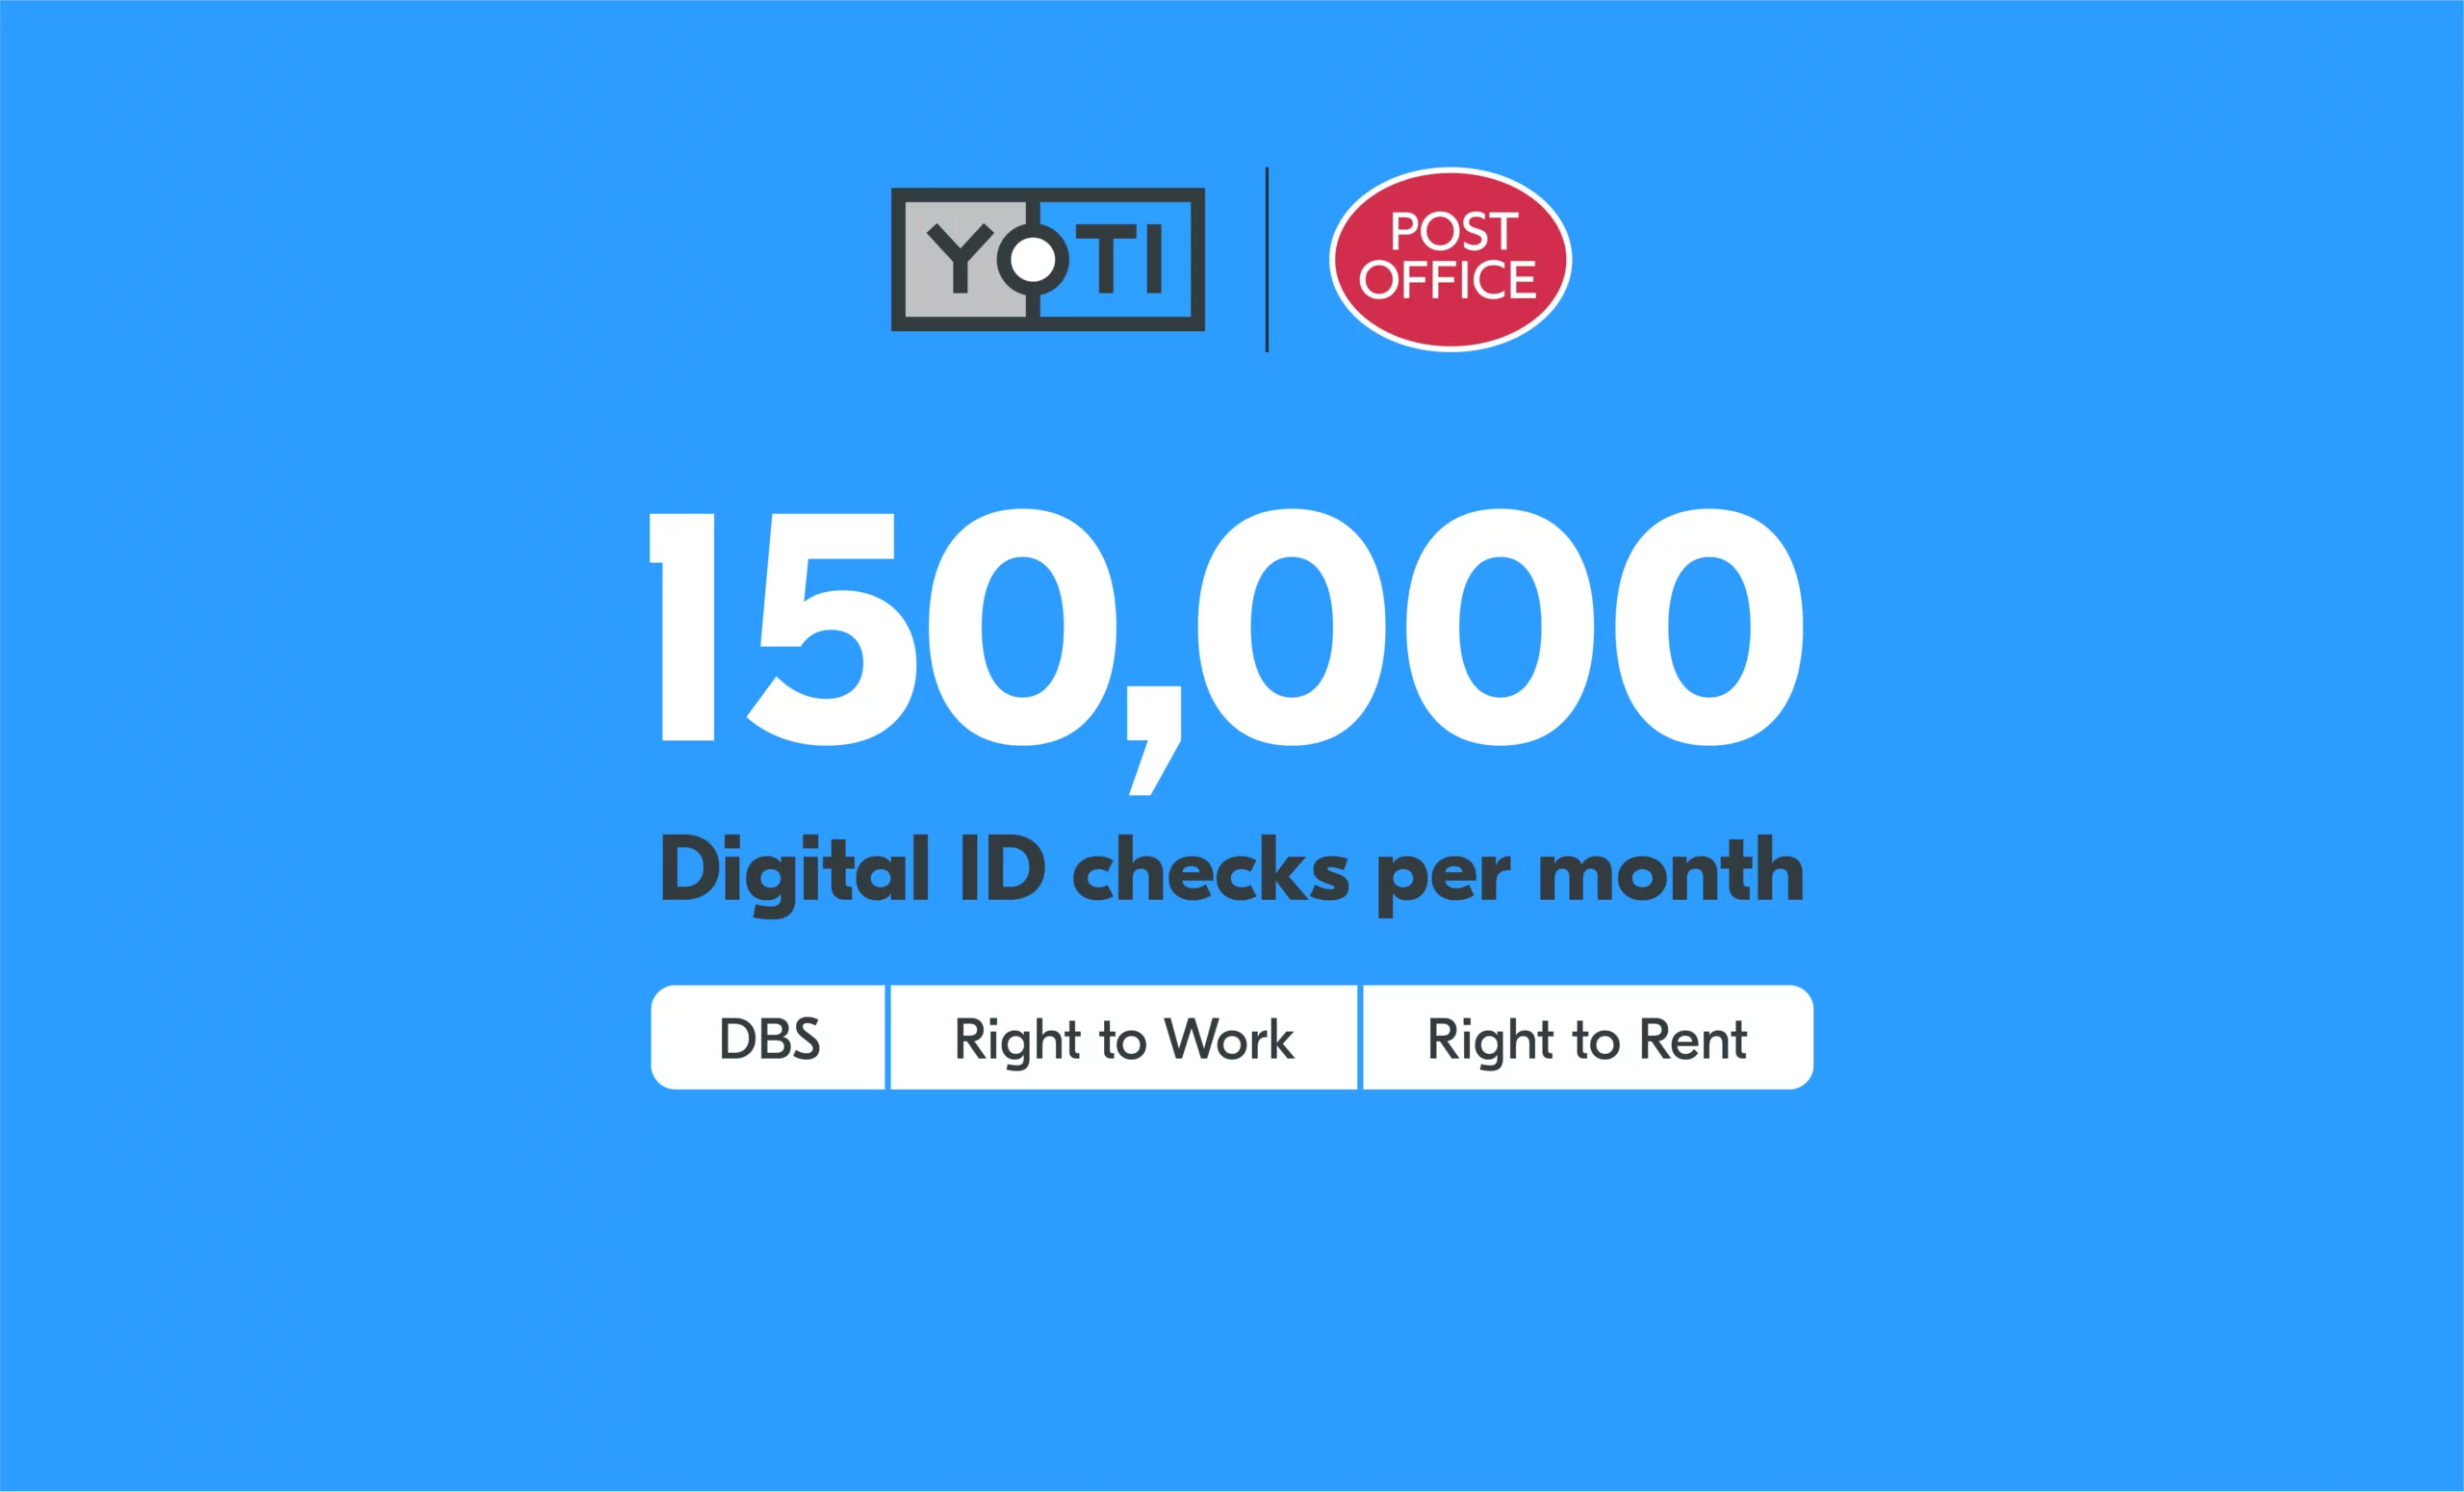 An image with the Yoti and Post Office logos at the top. Underneath these, the text reads "150,000 Digital ID checks per month". Below this the text says "DBS, Right to work, Right to Rent"